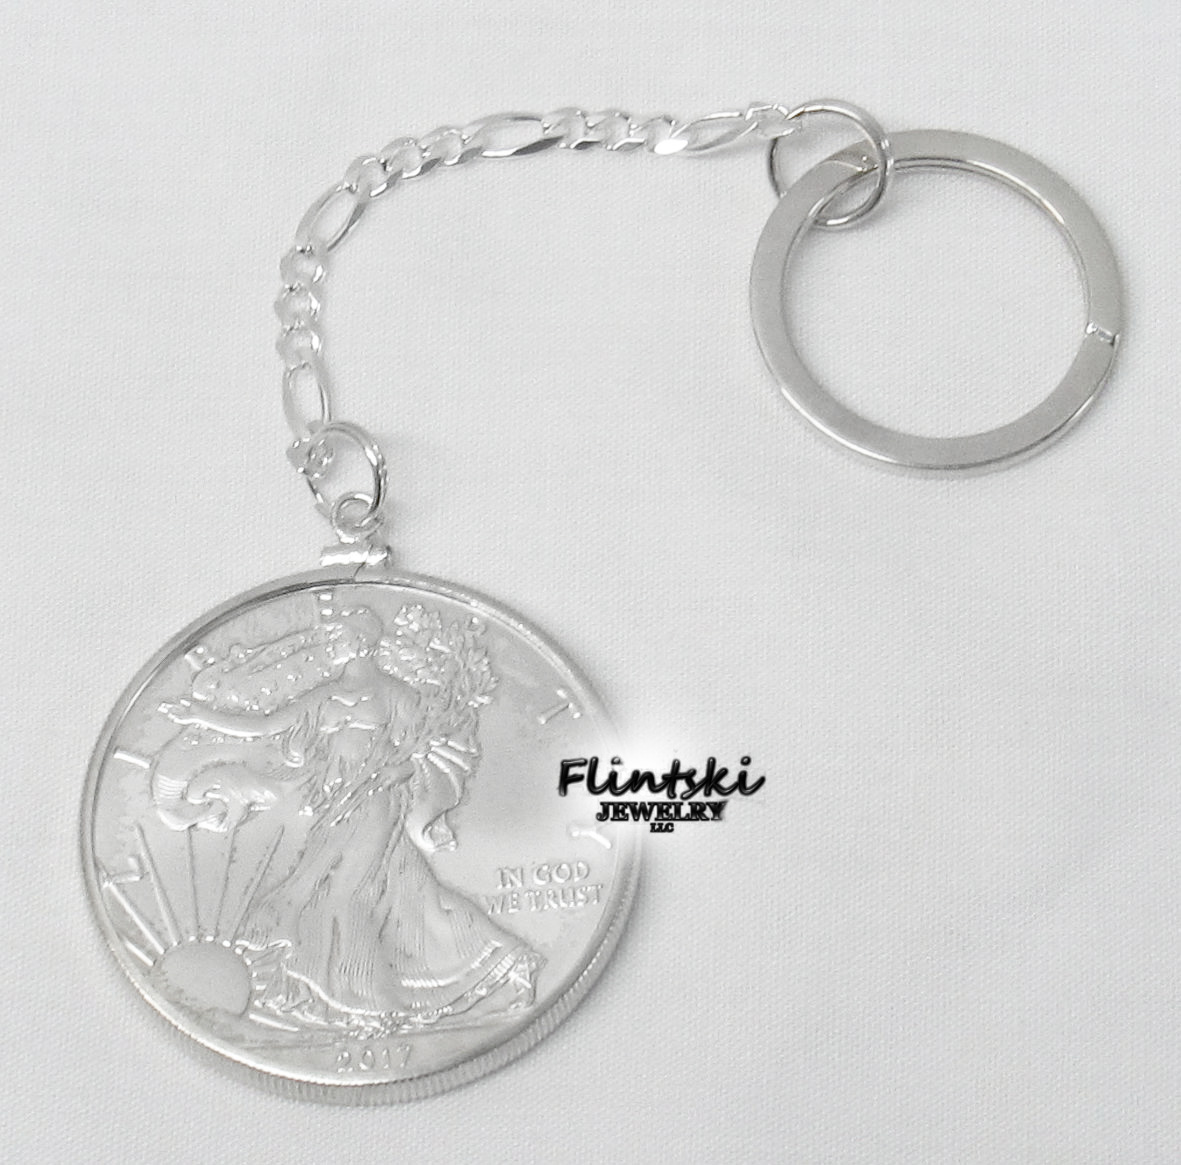 4 Pieces Silver Plate Key Ring For Us One Dollar Coin 